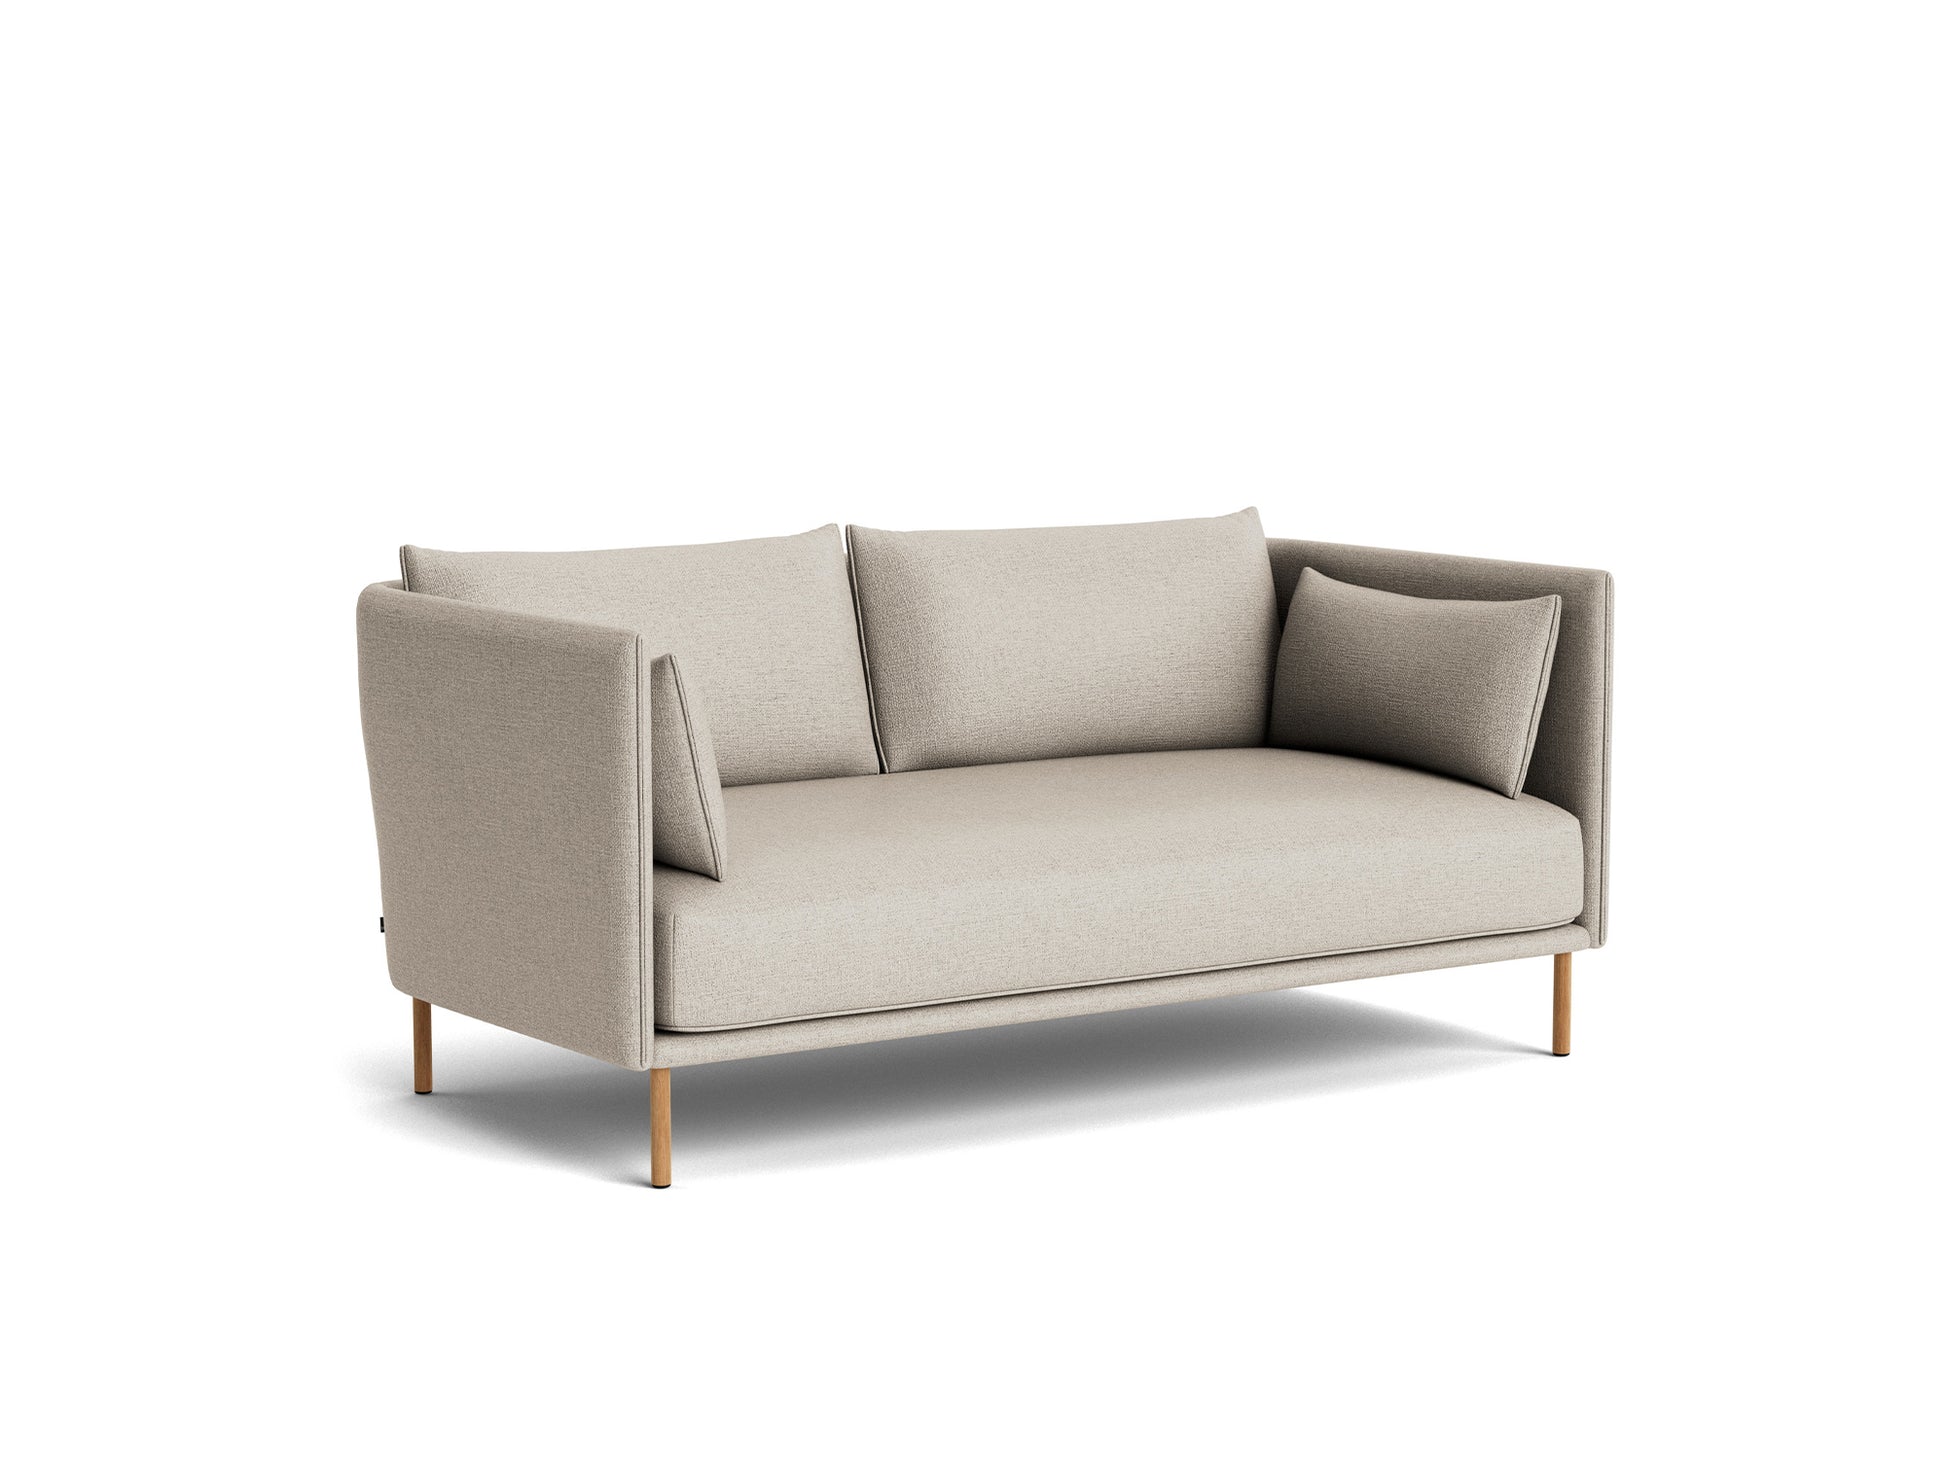 Silhouette Sofa - Roden 04, Oiled Oak Base, Fabric Match Piping